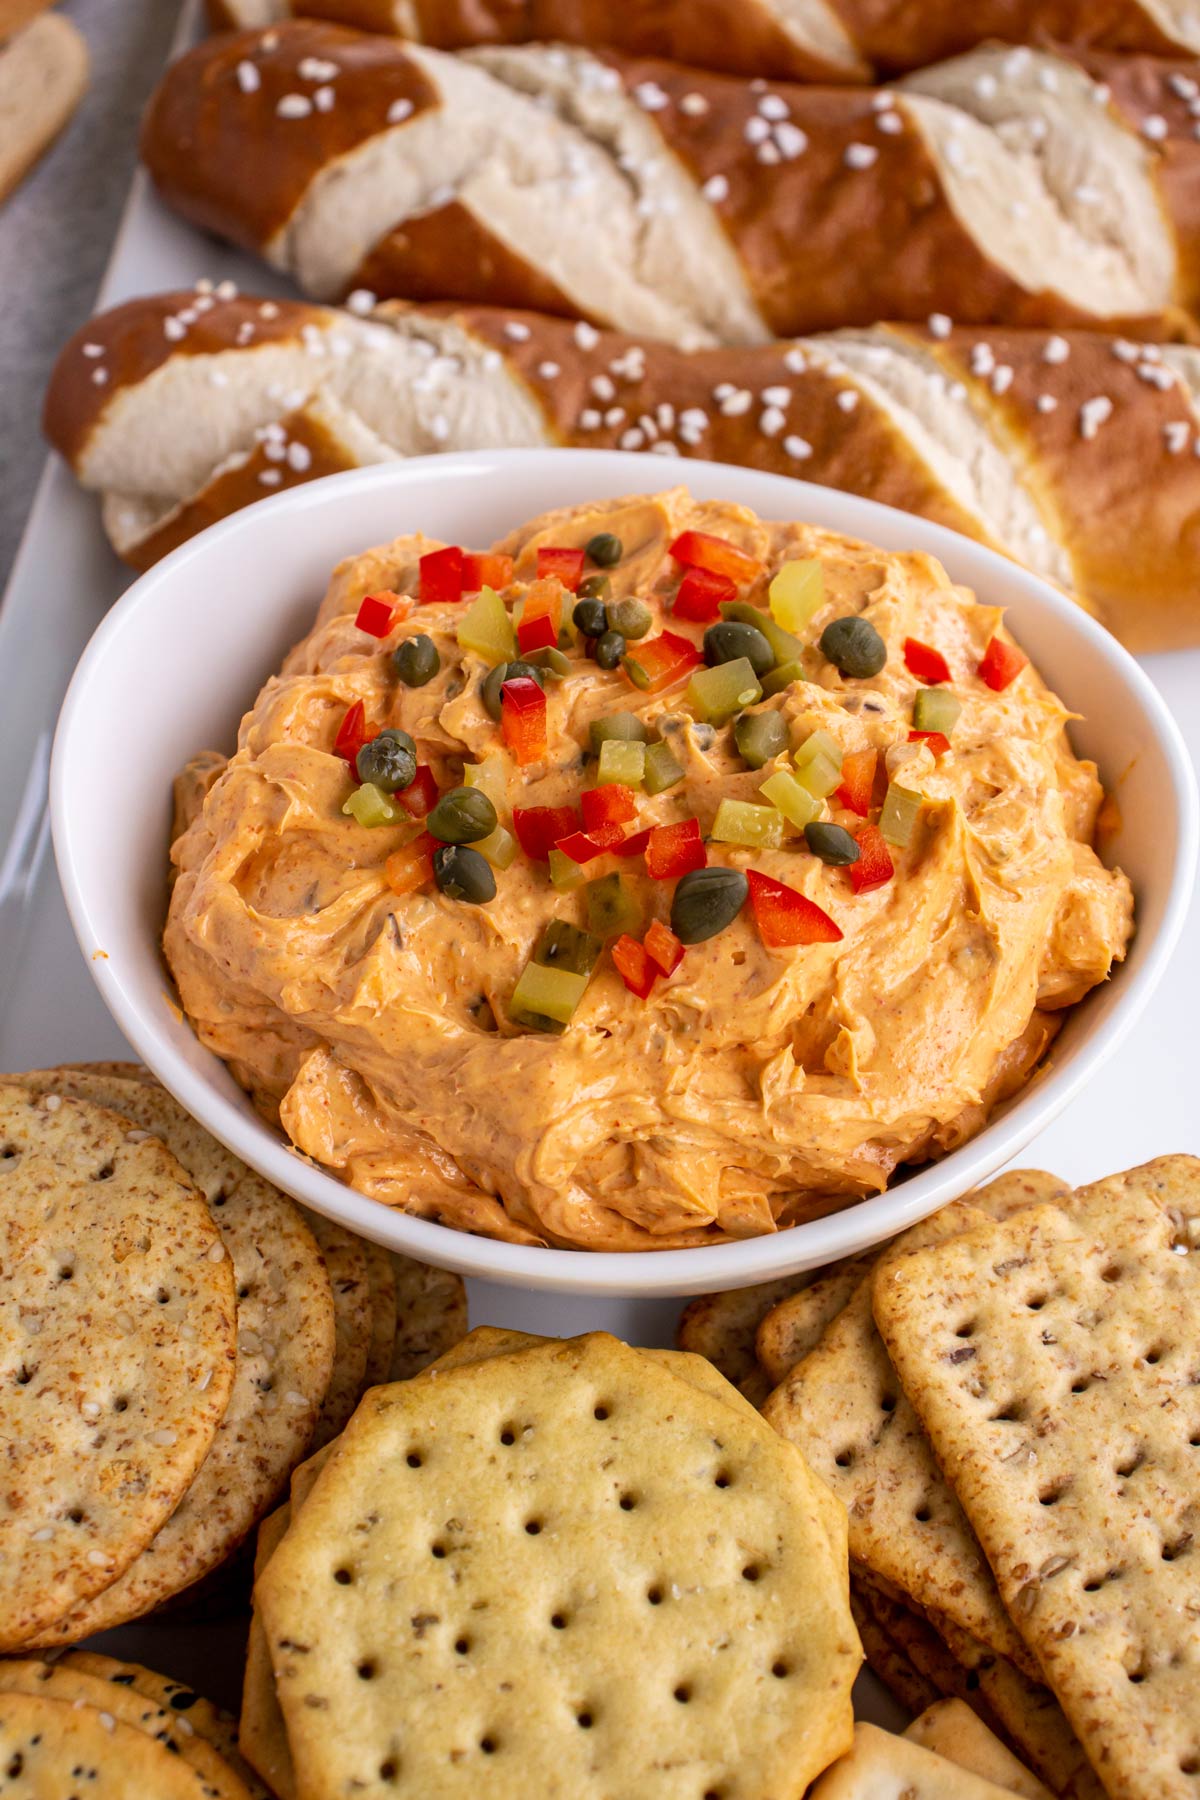 Liptauer cheese spread in a white bowl surrounded by crackers and soft pretzels sticks.